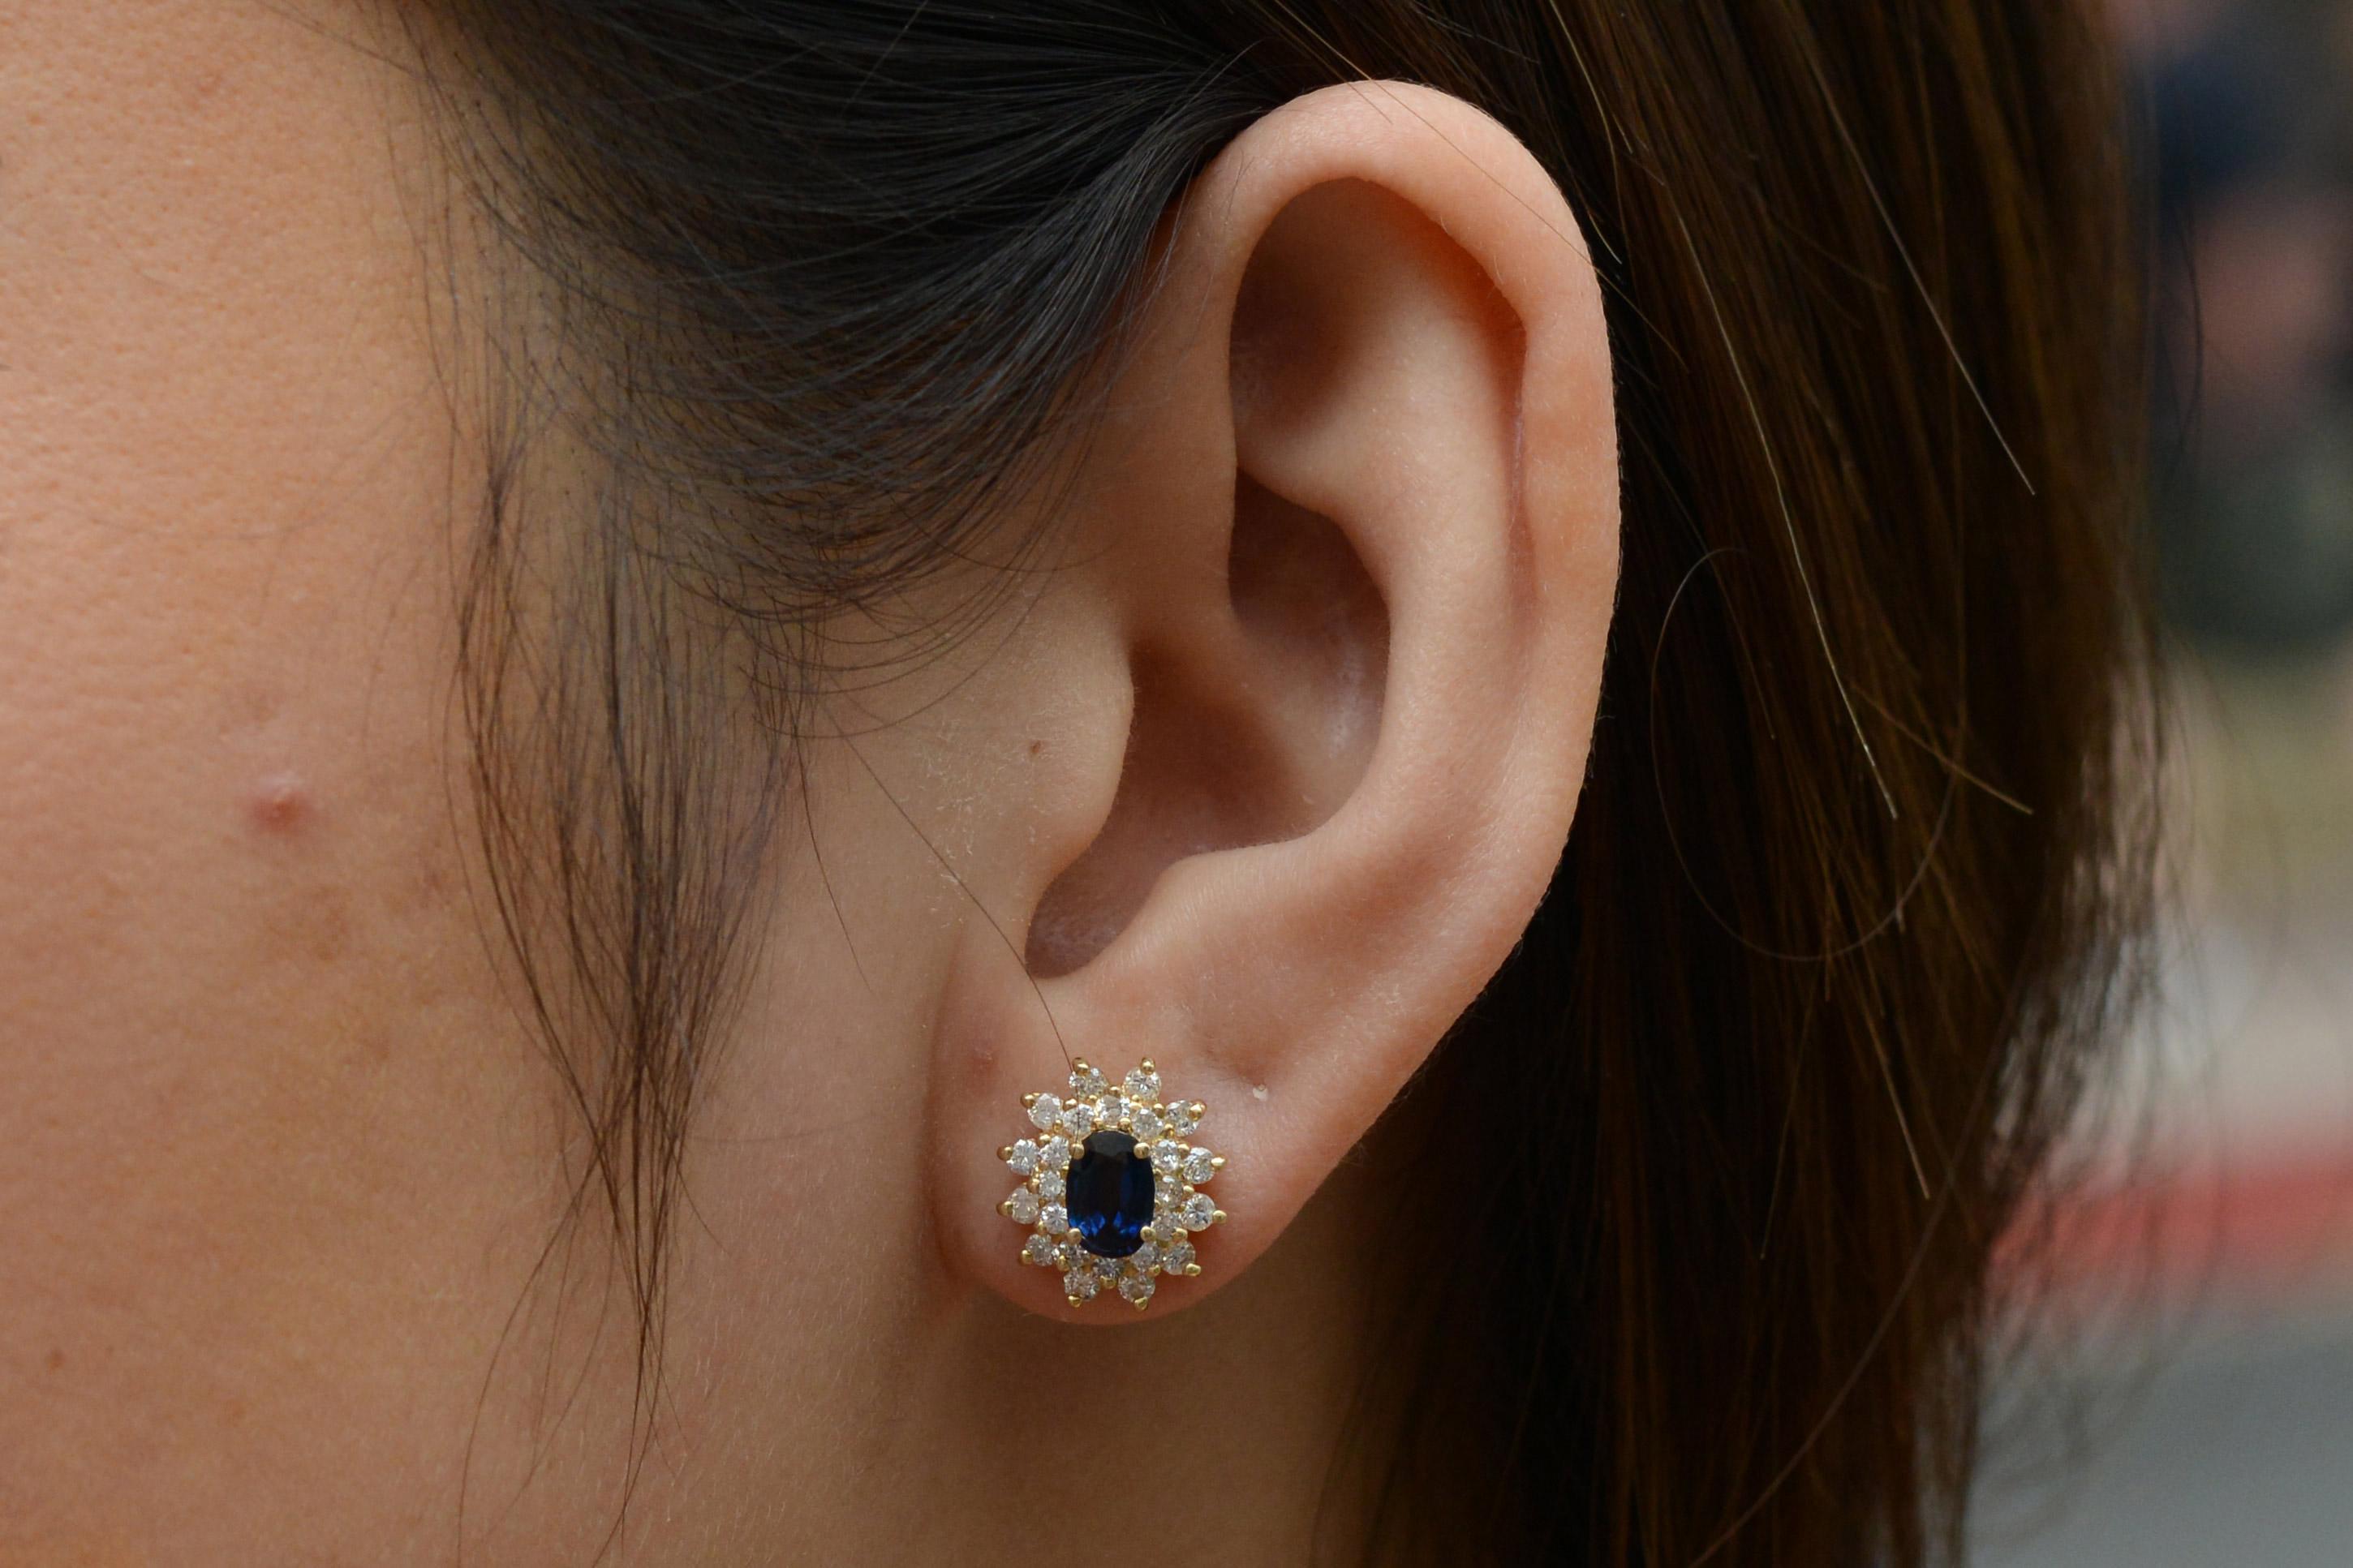 These chic vintage sapphire stud earrings offer an exquisite touch of sophistication and elegance. Adorned with naturally sourced sapphires at nearly 1.50 carats total presenting a deep navy blue hue. Laced with 48 shimmering accent diamonds